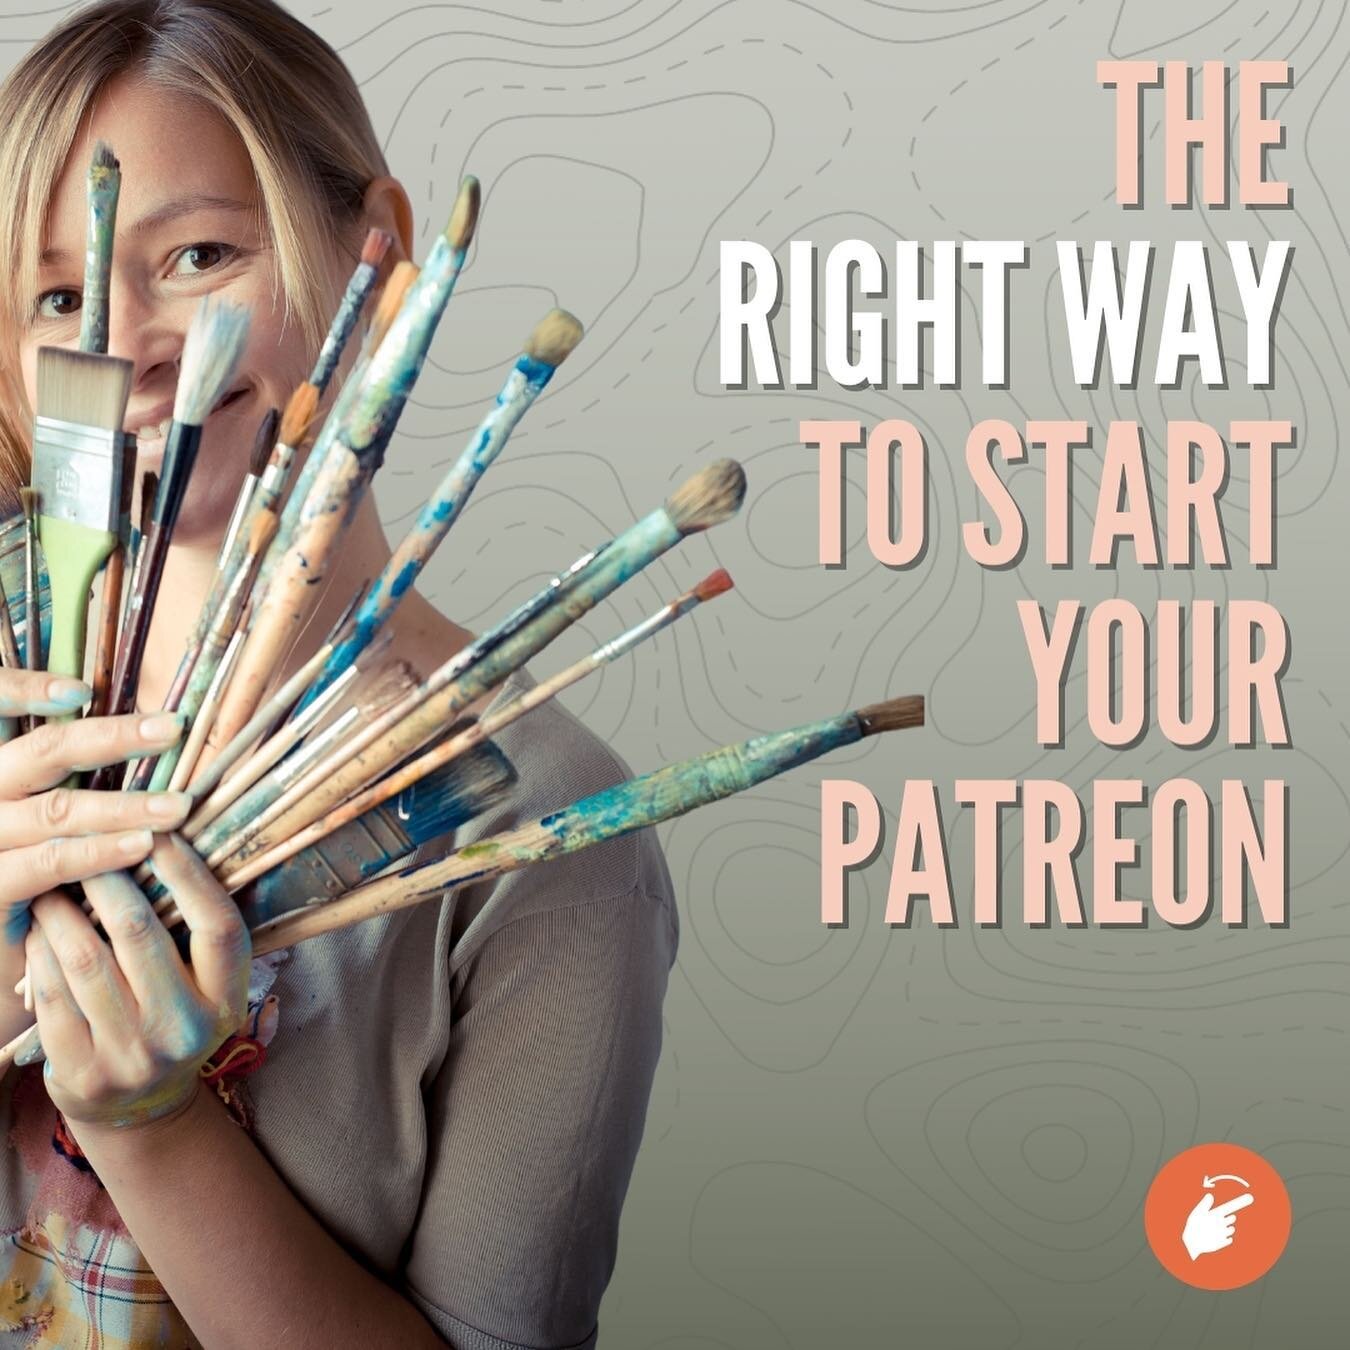 Want to launch a Patreon to sell more of your creative work?⁠⁠
⁠⁠
Your first mistake is starting off setting up the wrong expectations for your patrons and spending too much of your most valuable asset - your time ⏰⁠⁠
⁠⁠
You wouldn't trust someone wh